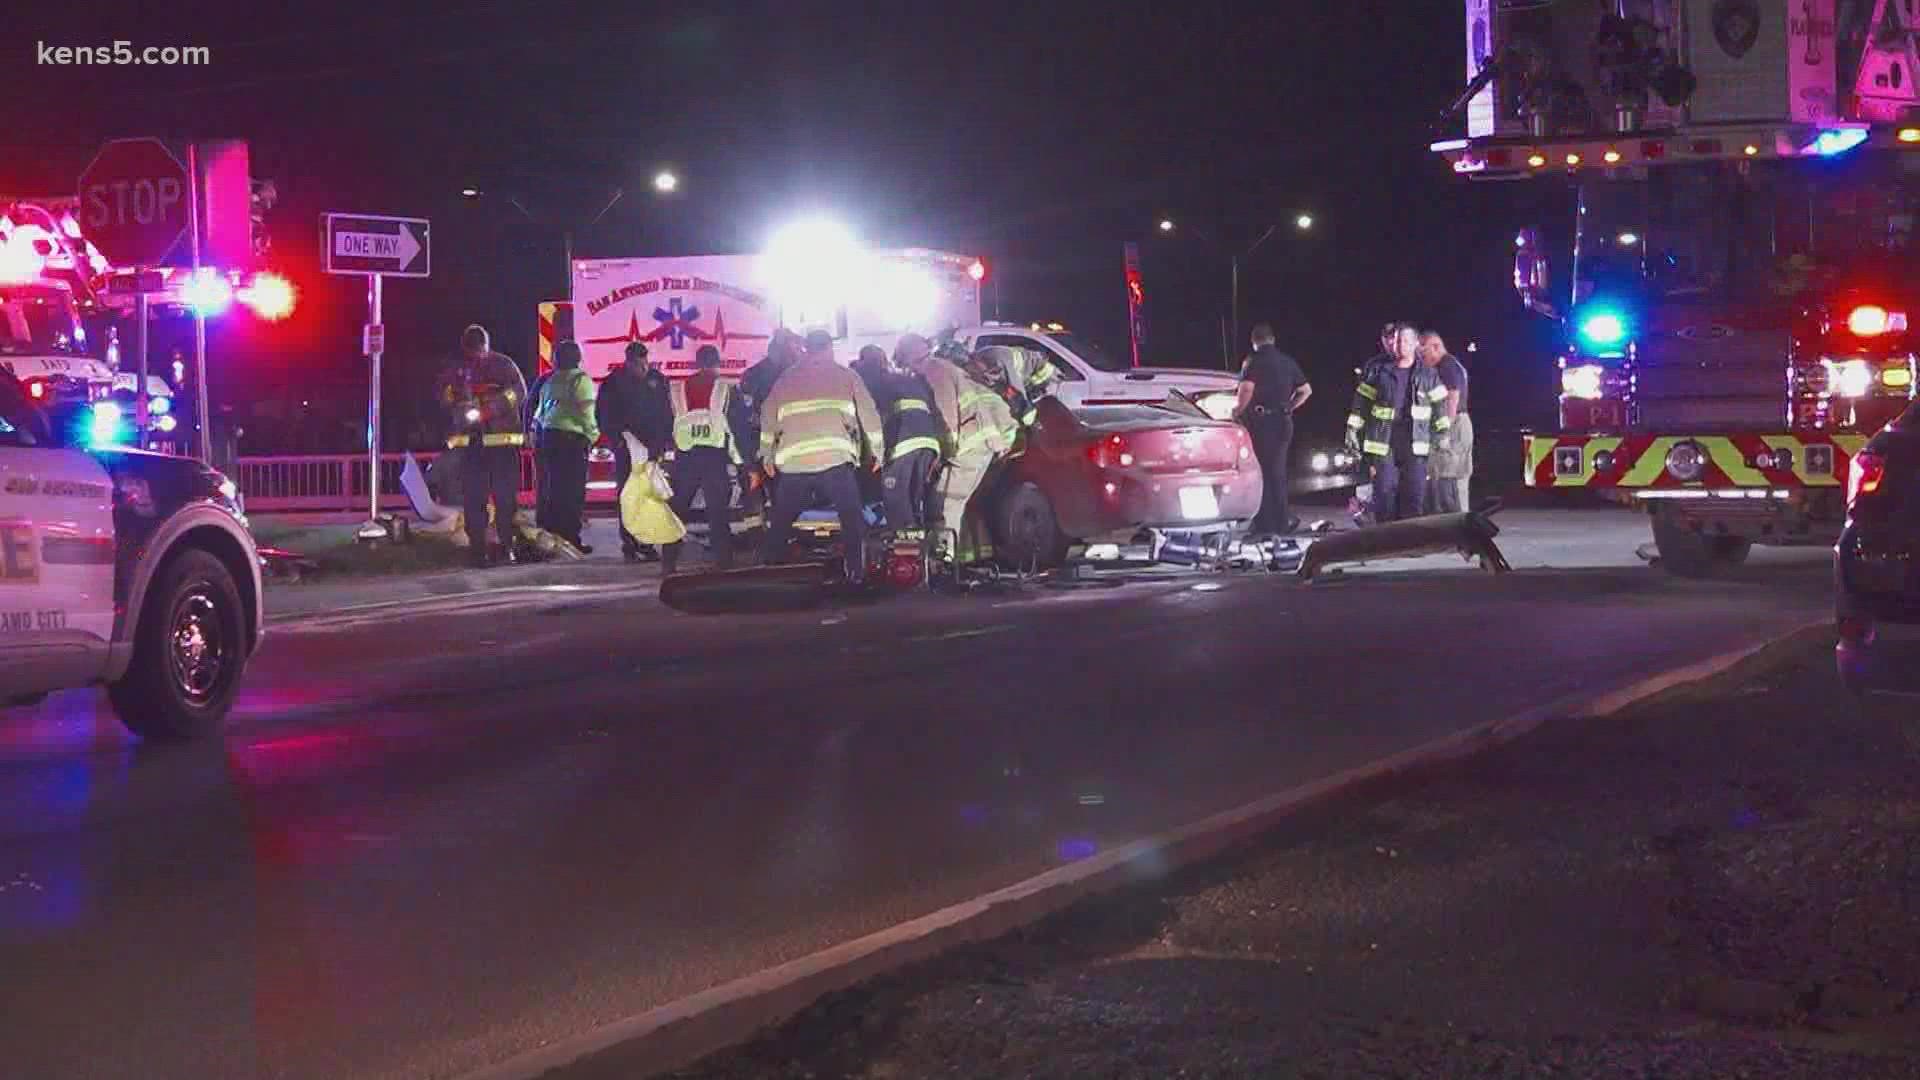 The driver of the car that crashed into the stopped one was pinned inside their vehicle and had to be cut out by firefighters using the JAWS of life.